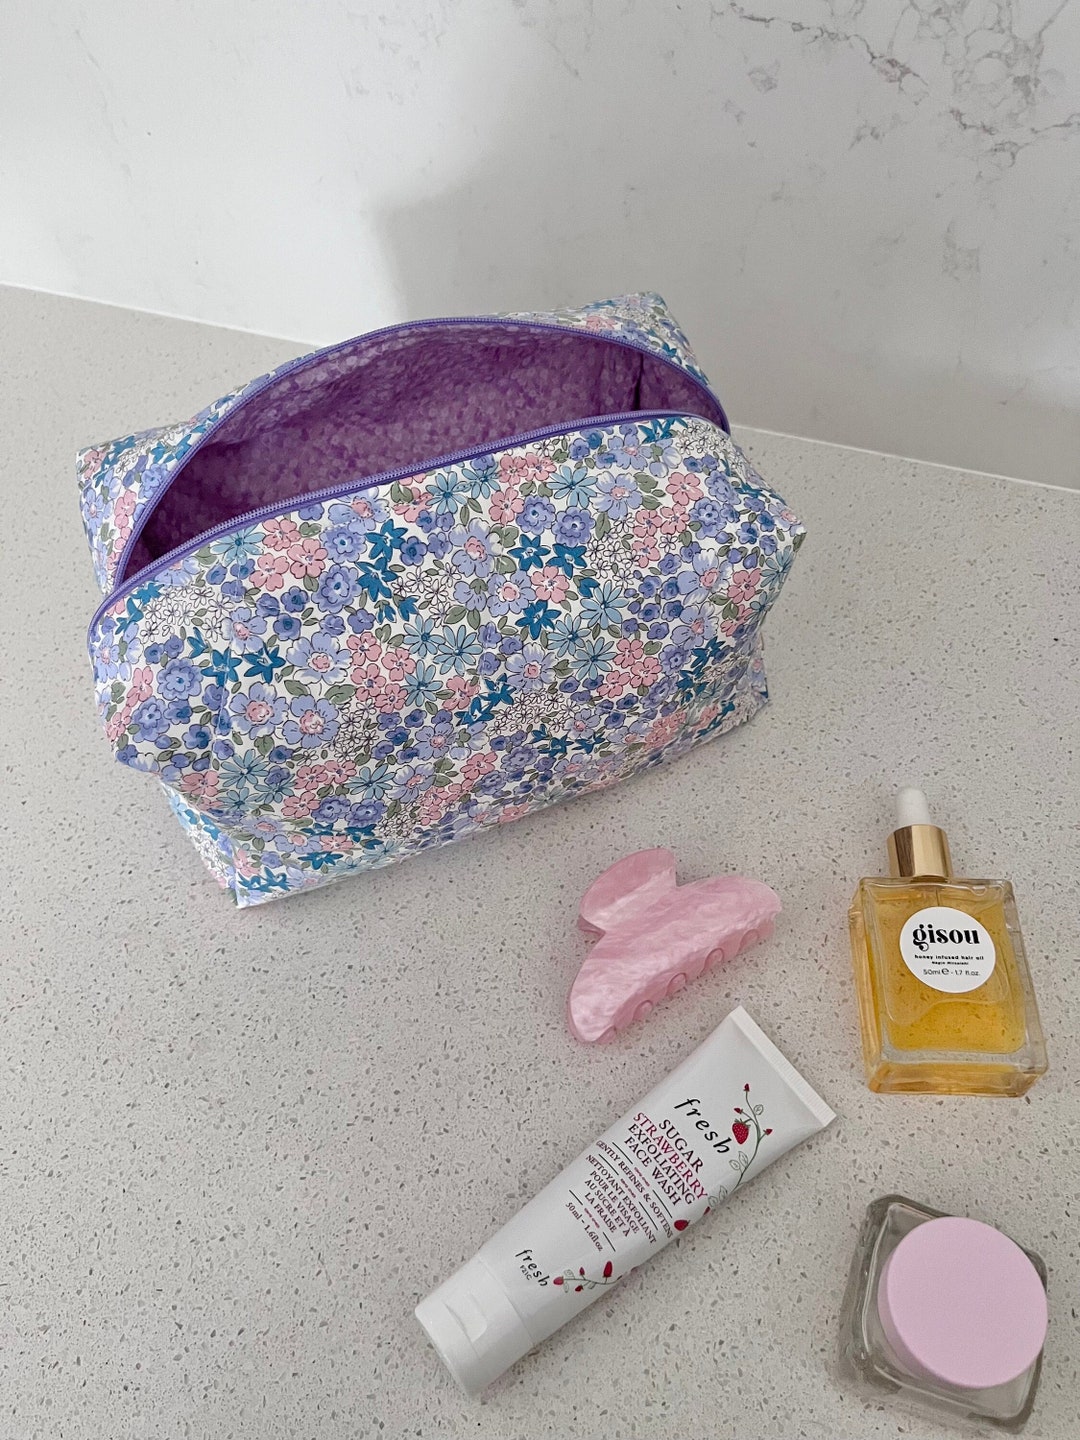 Handmade Quilted Terry Cloth Makeup Bag White Terry Bag Cosmetic Bag,  Toiletry Bag, Make up Bag, Terry Towel Bag, Gifts for Her 